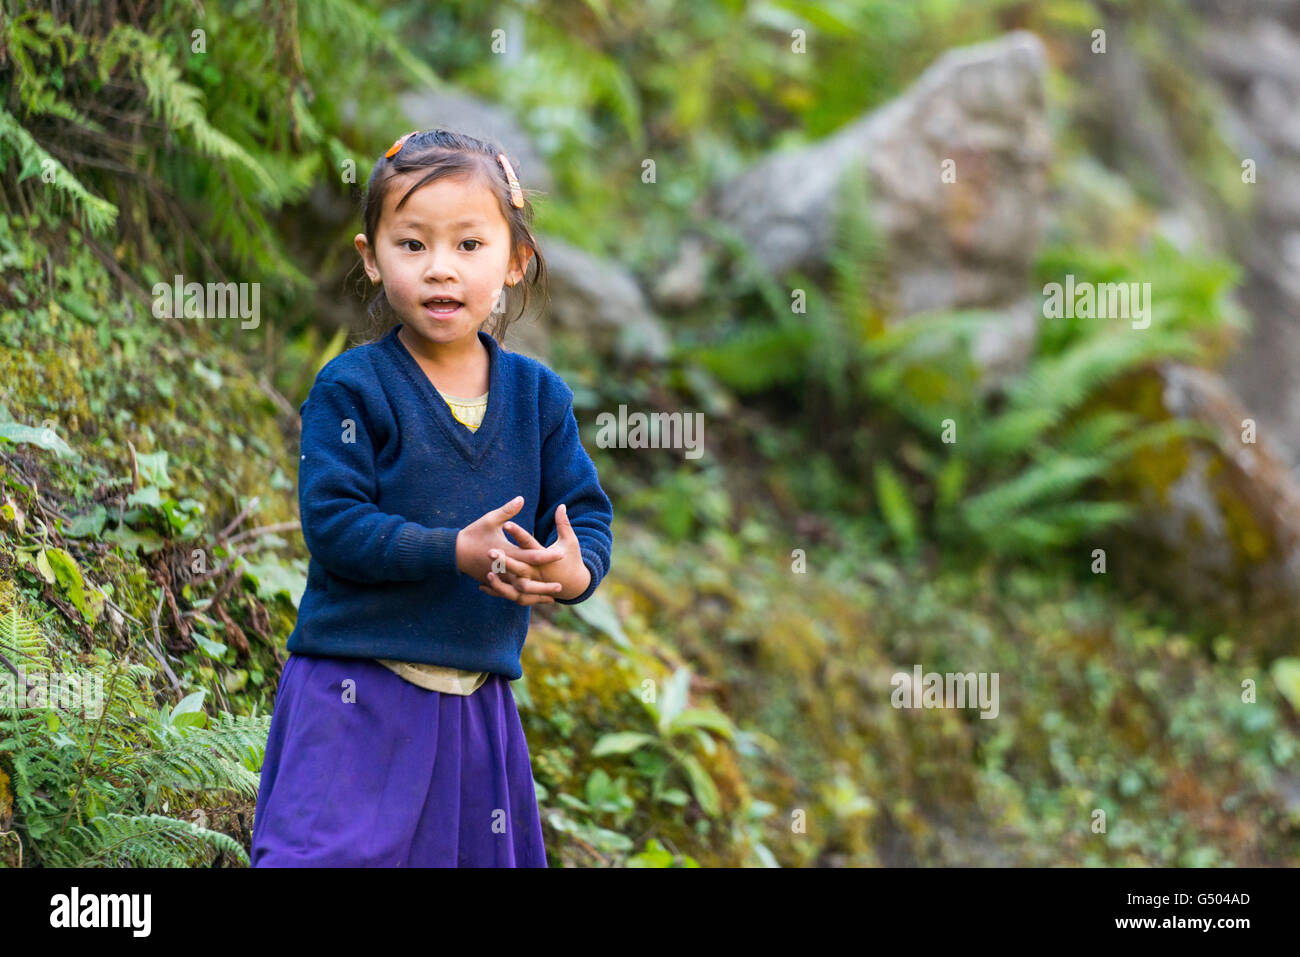 Nepal, Western Region, Dharapani, On the Annapurna Circuit - Day 3 - From Dharapani to Chame - Awakened Girl in the Manang District Stock Photo